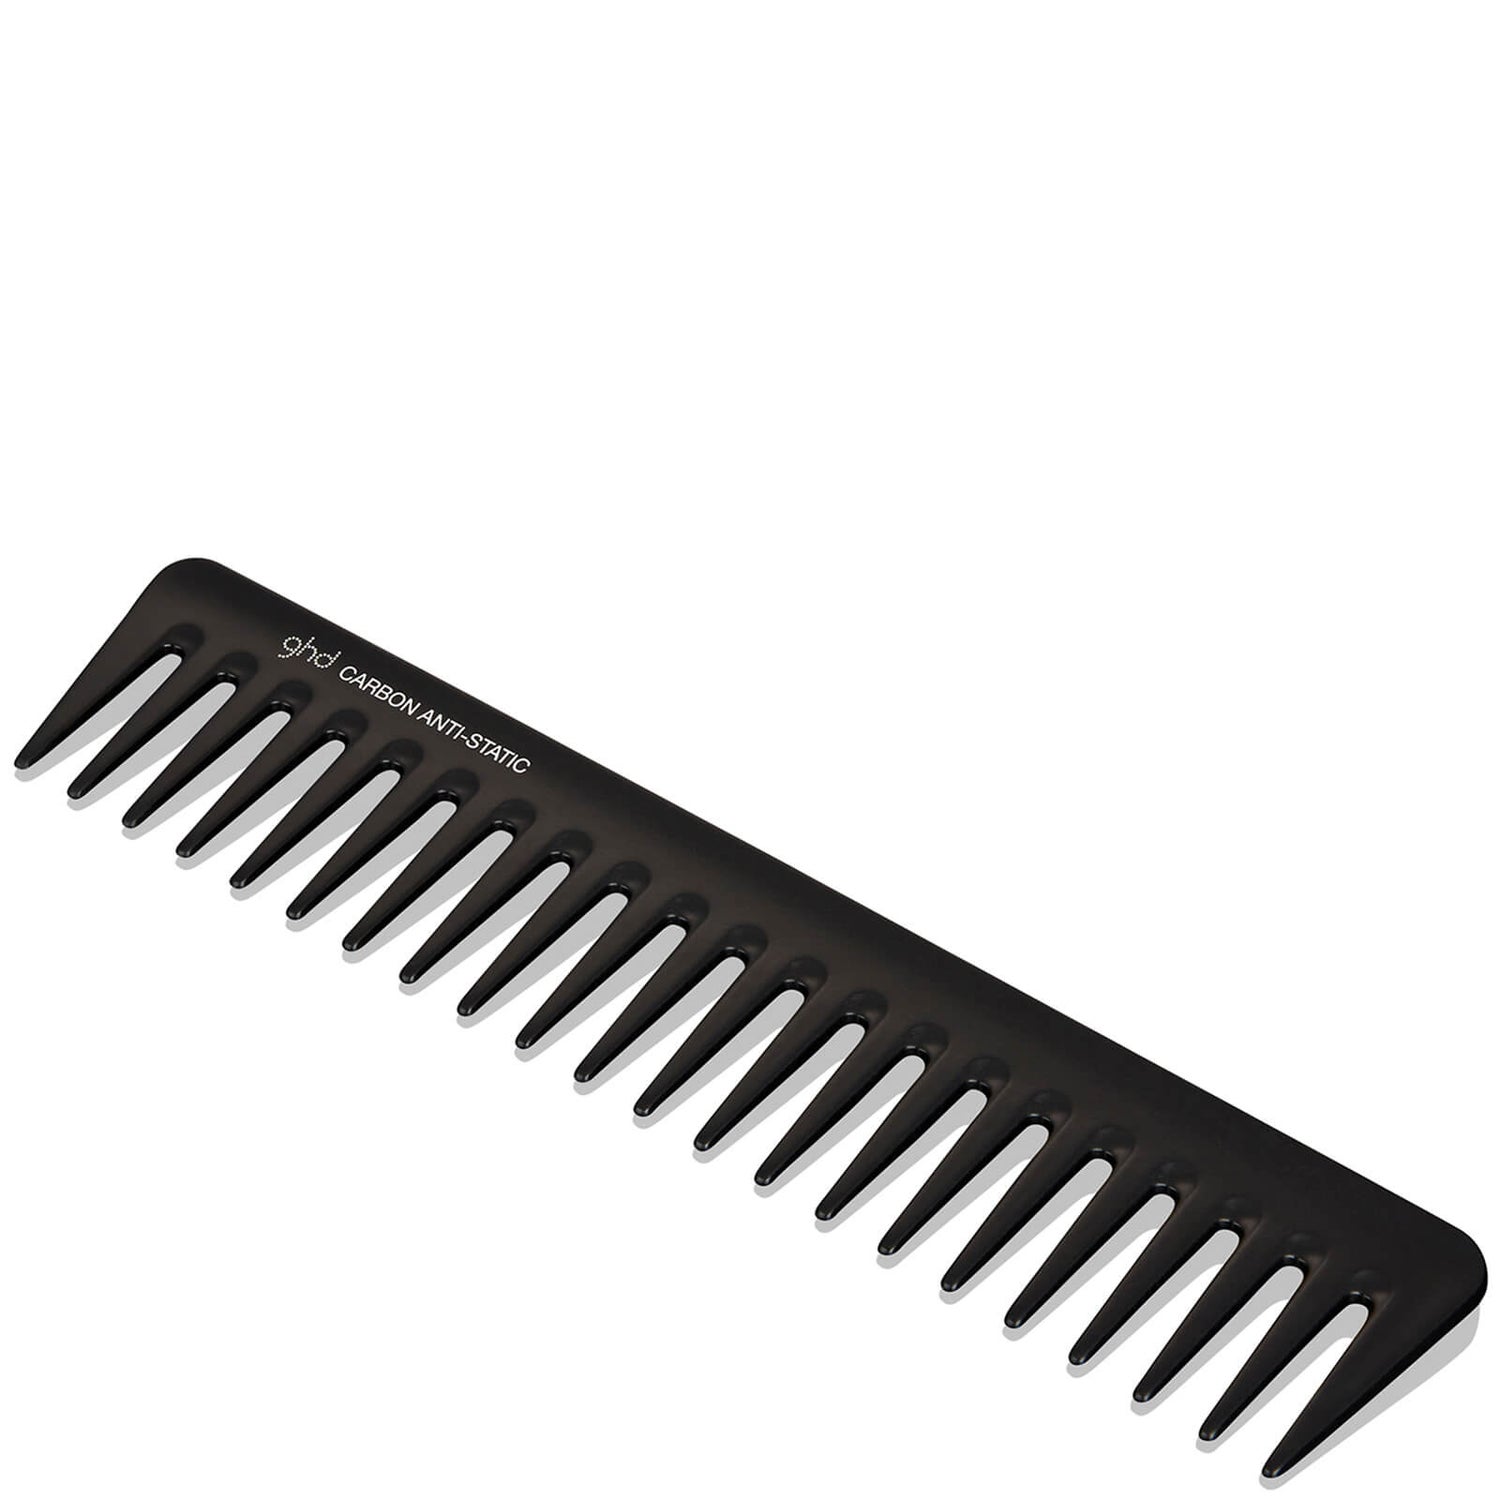 ghd The Comb Out Detangling Hair Comb